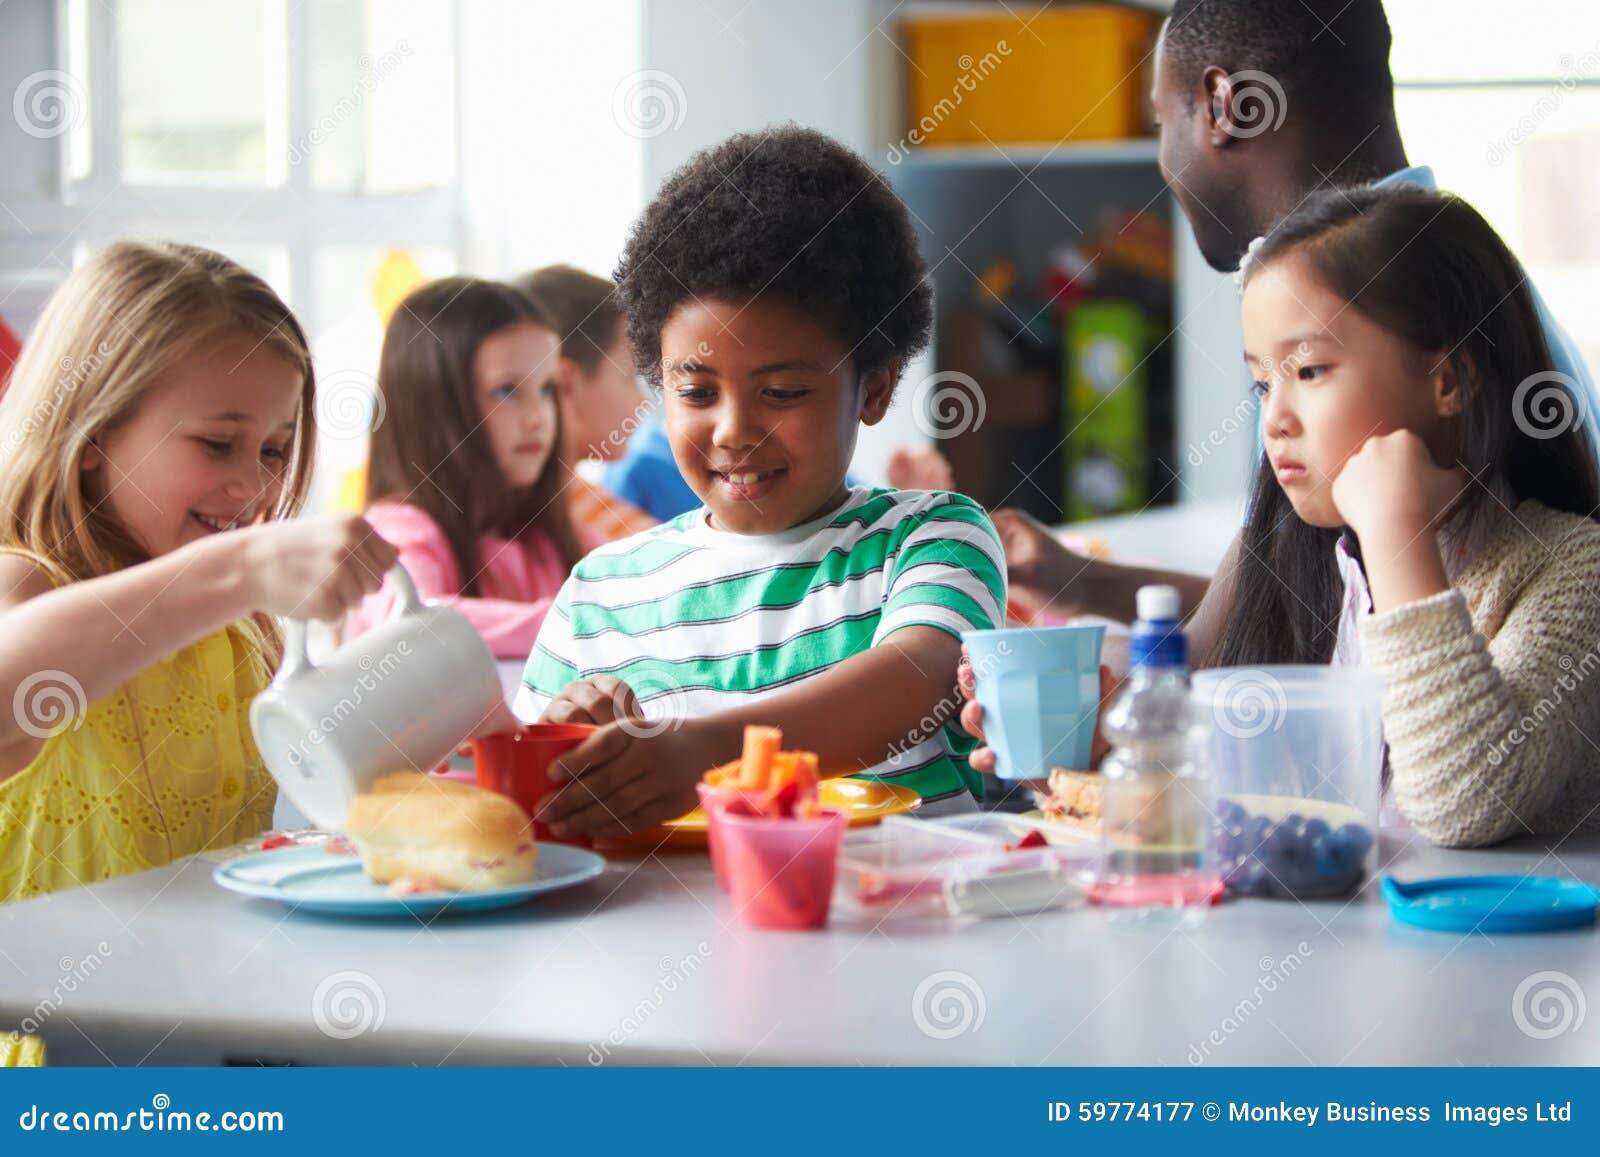 group of children eating lunch in school cafeteria